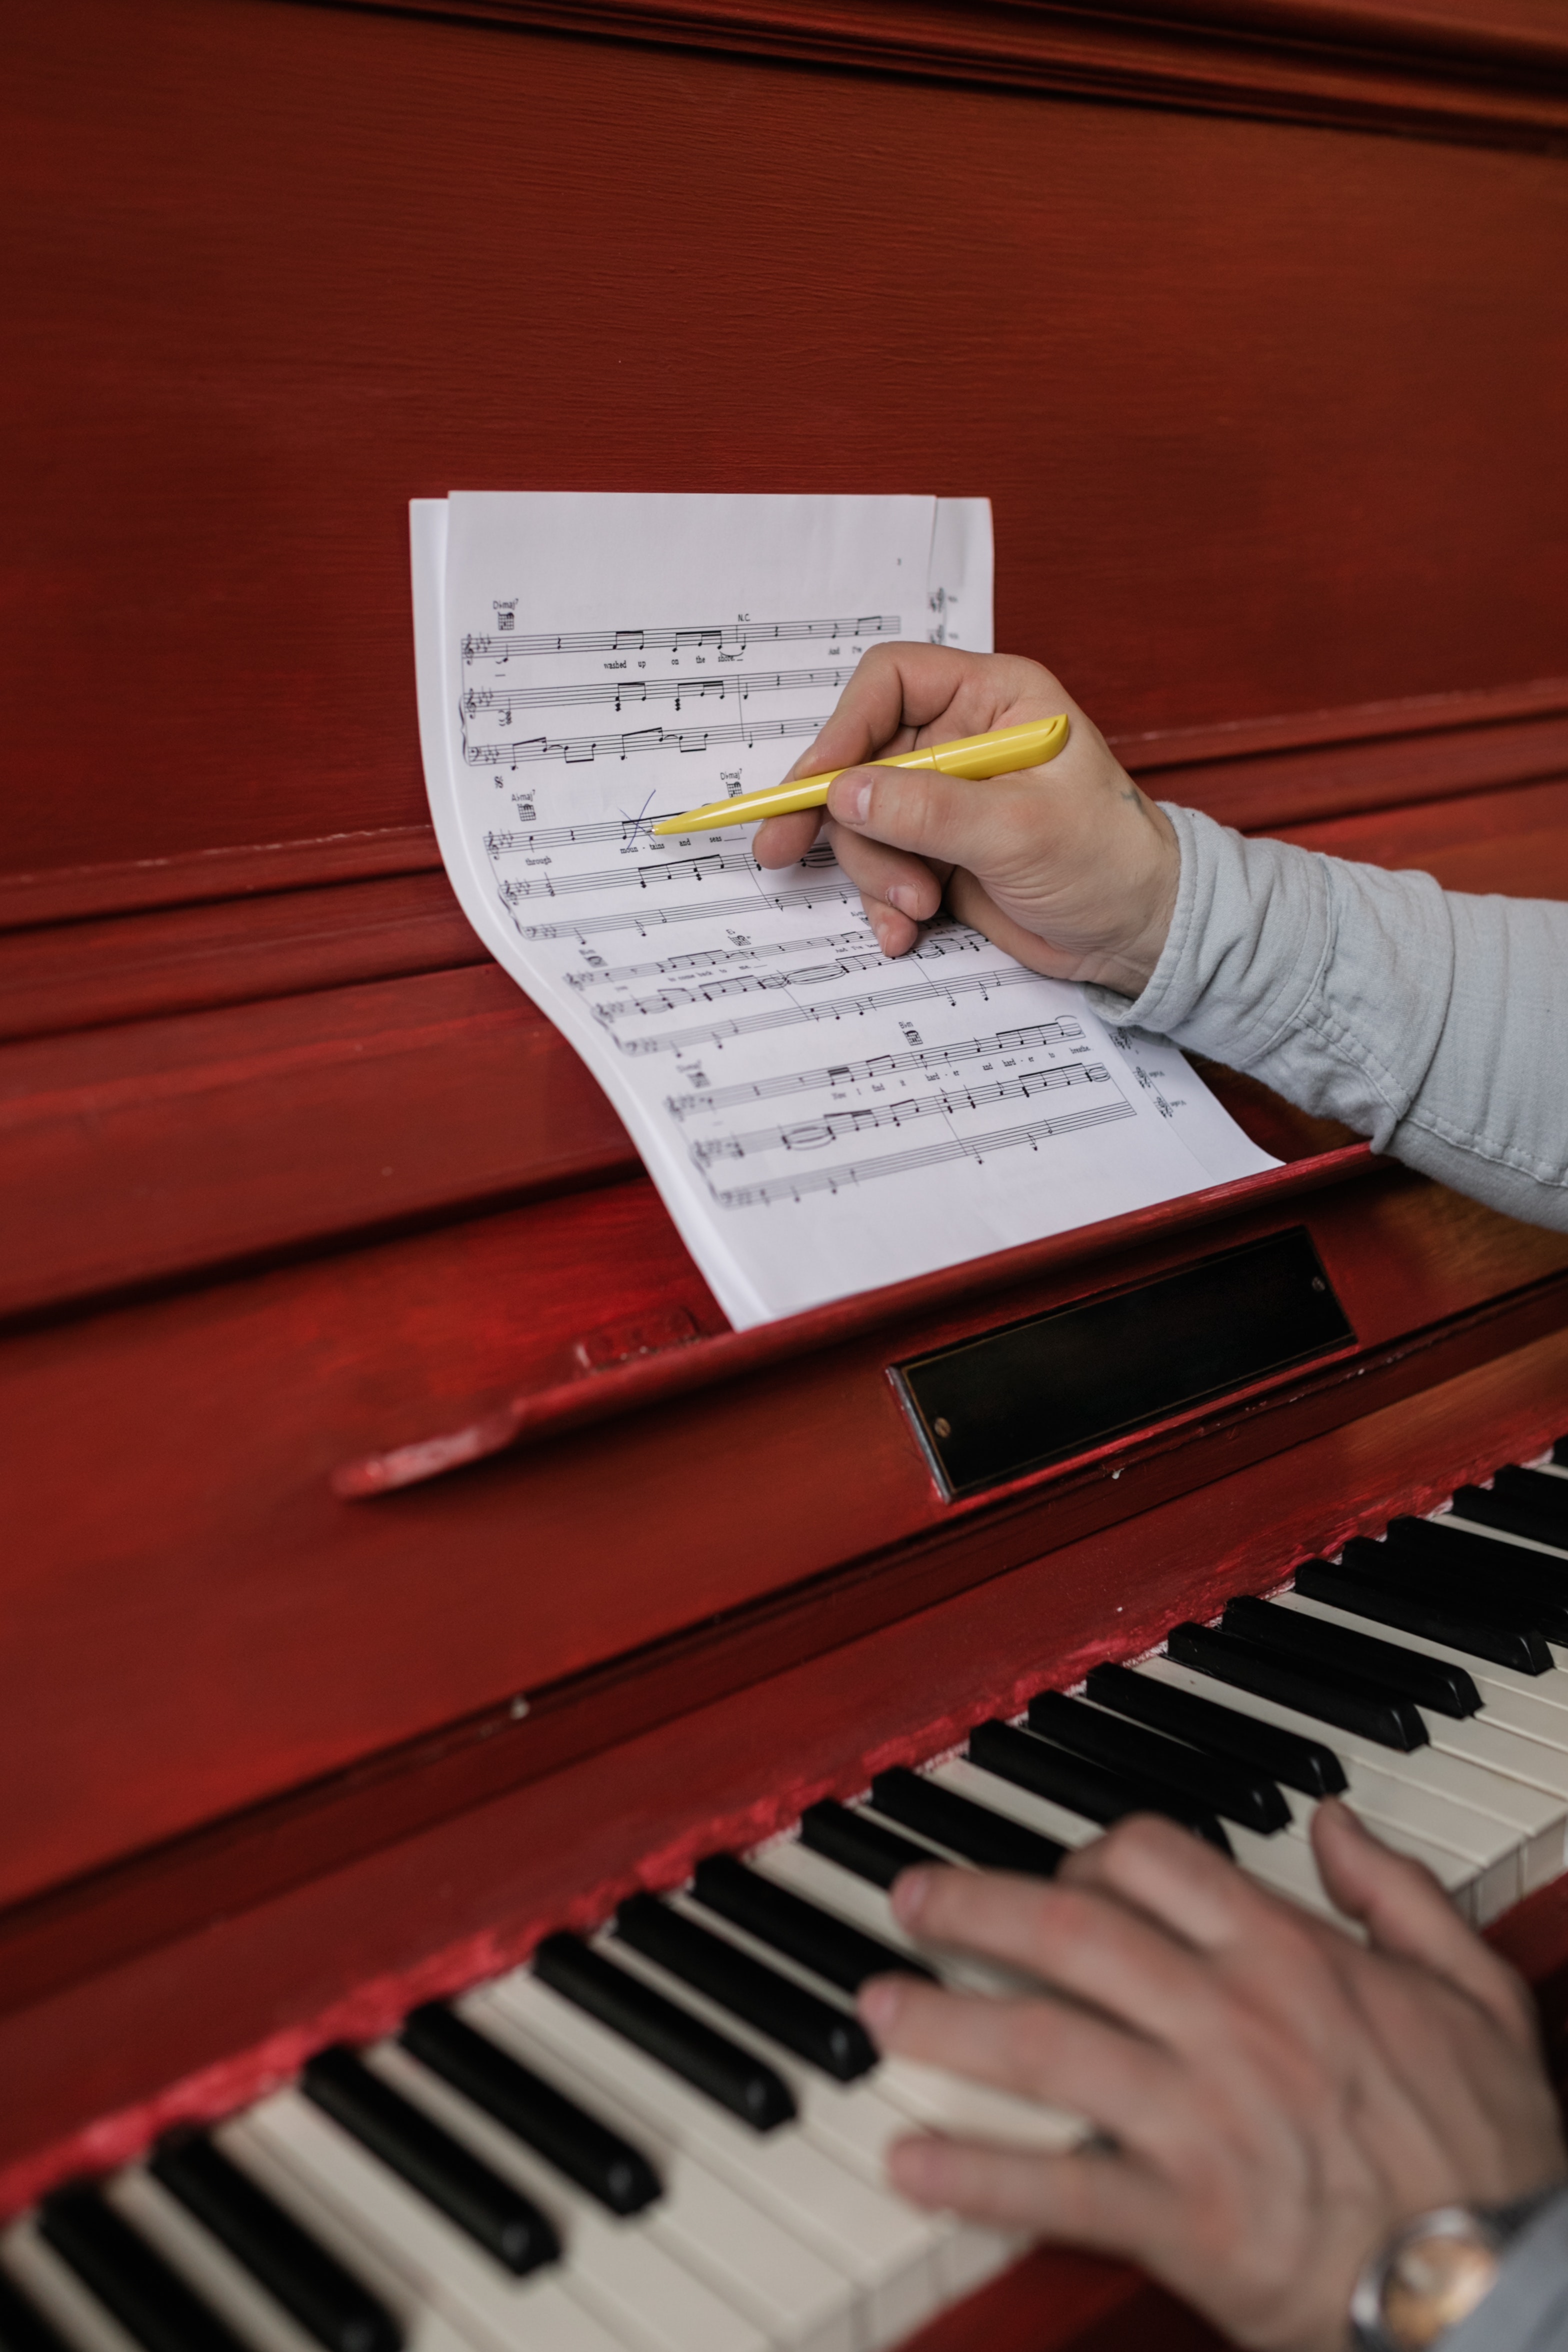 Guided Composition, Part 2: Add Pitches to the Rhythmic Motive